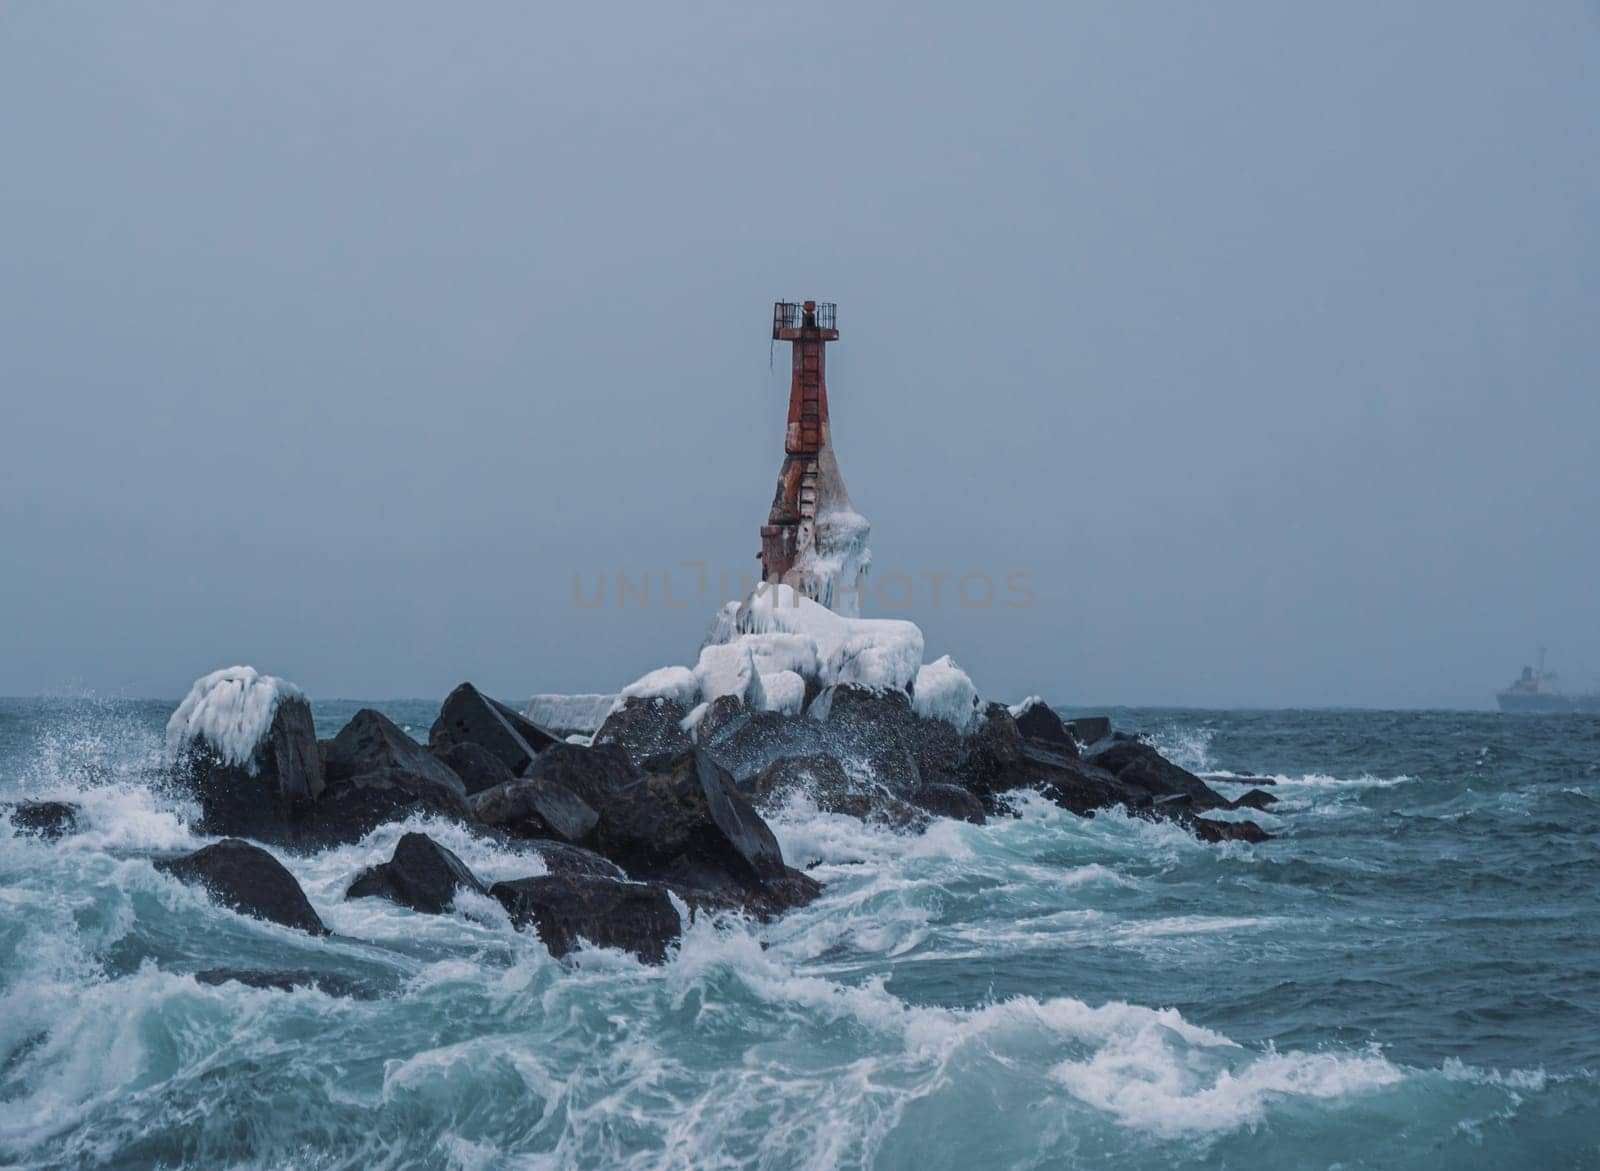 Lonely lighthouse on rocky shore during stormy weather in the evening. by Busker